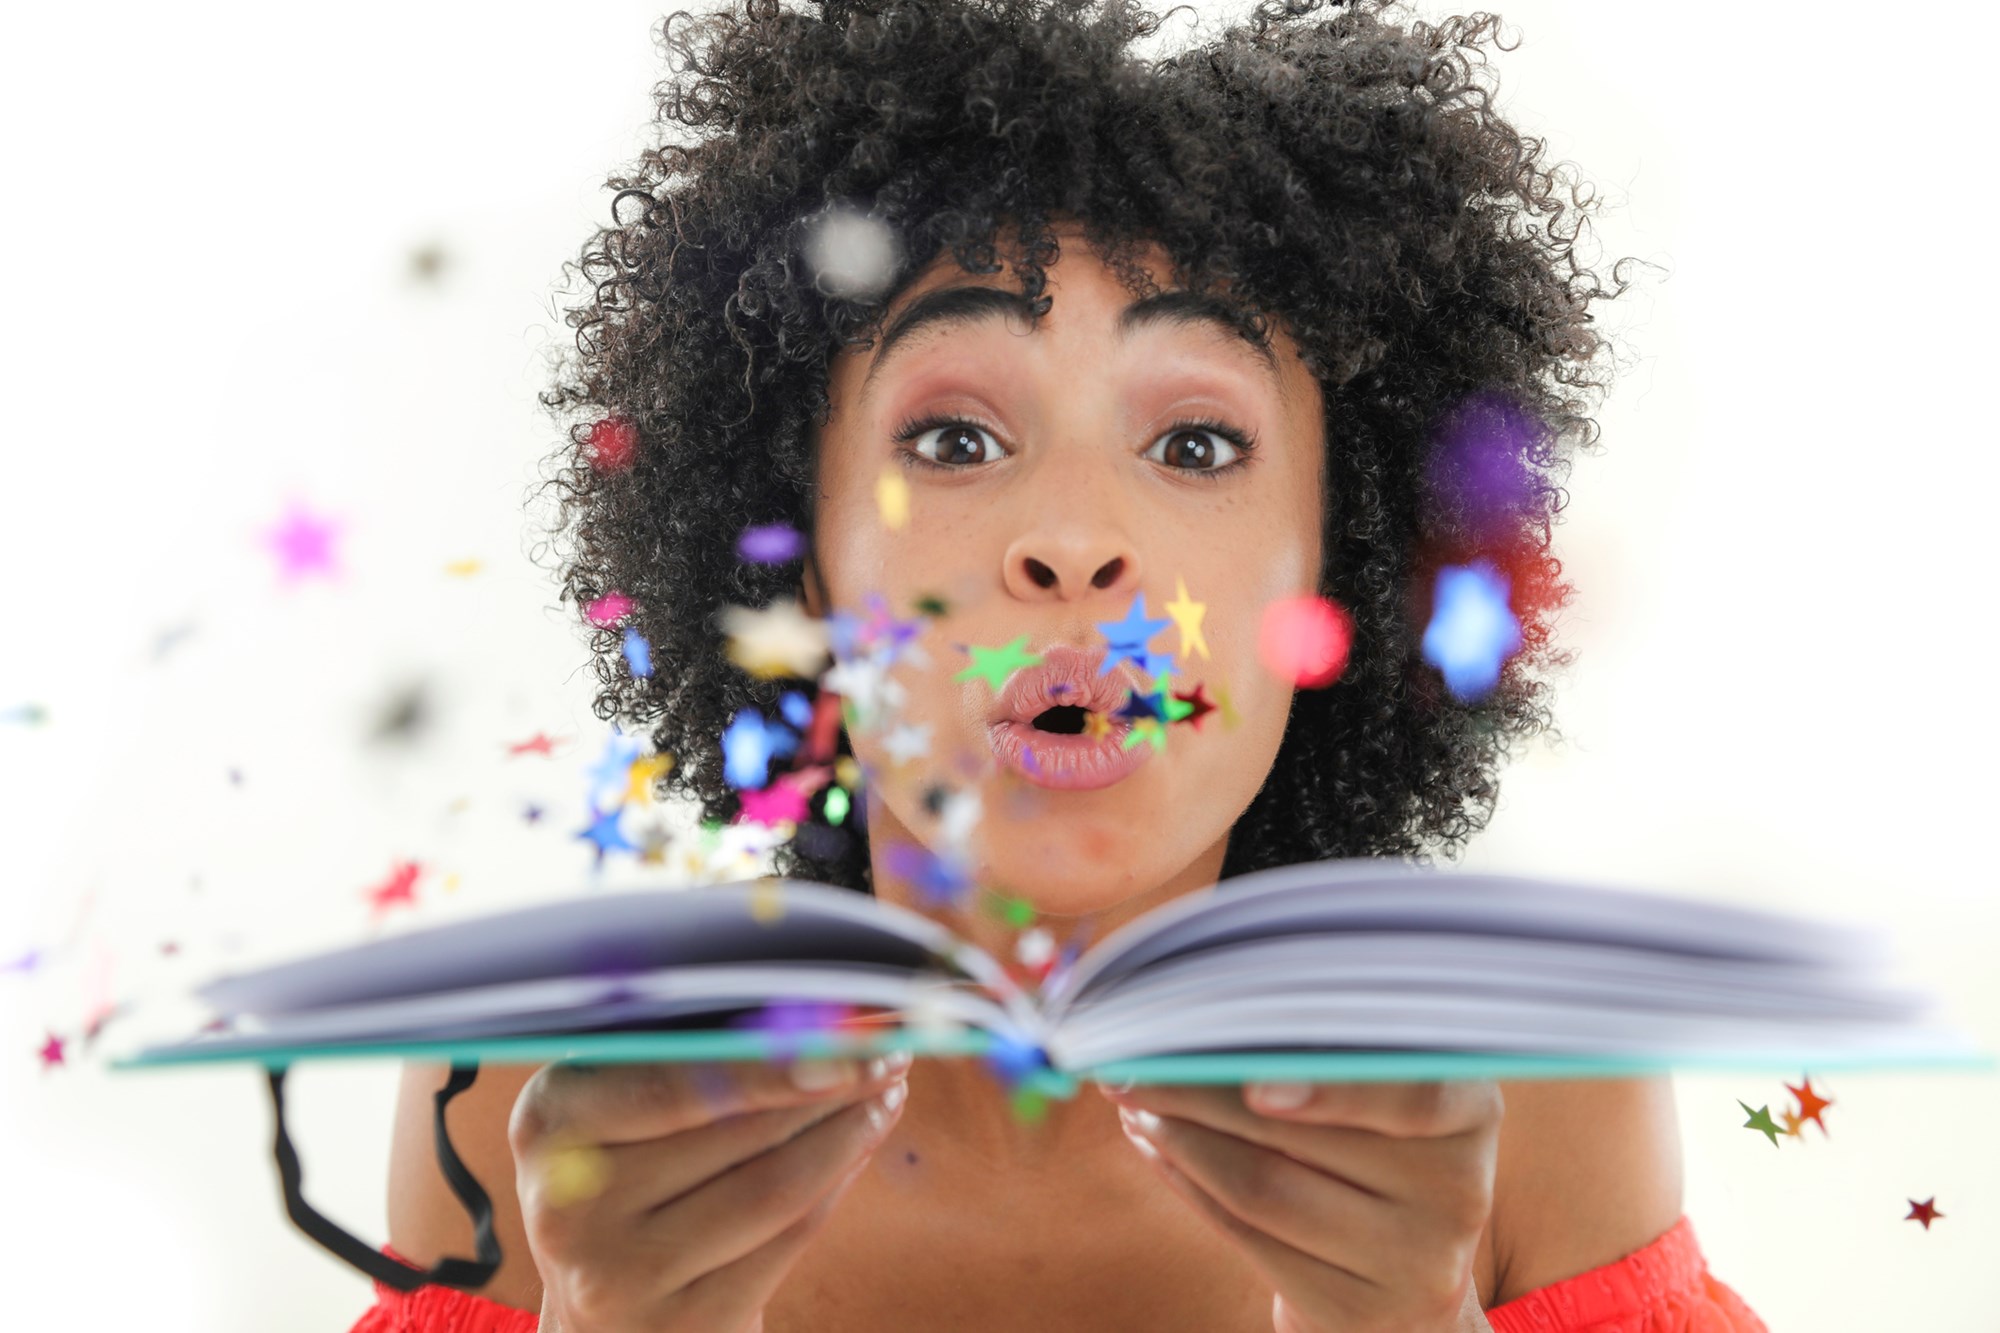 Photo of a woman holding an open book and blowing colorful star confetti out of it.